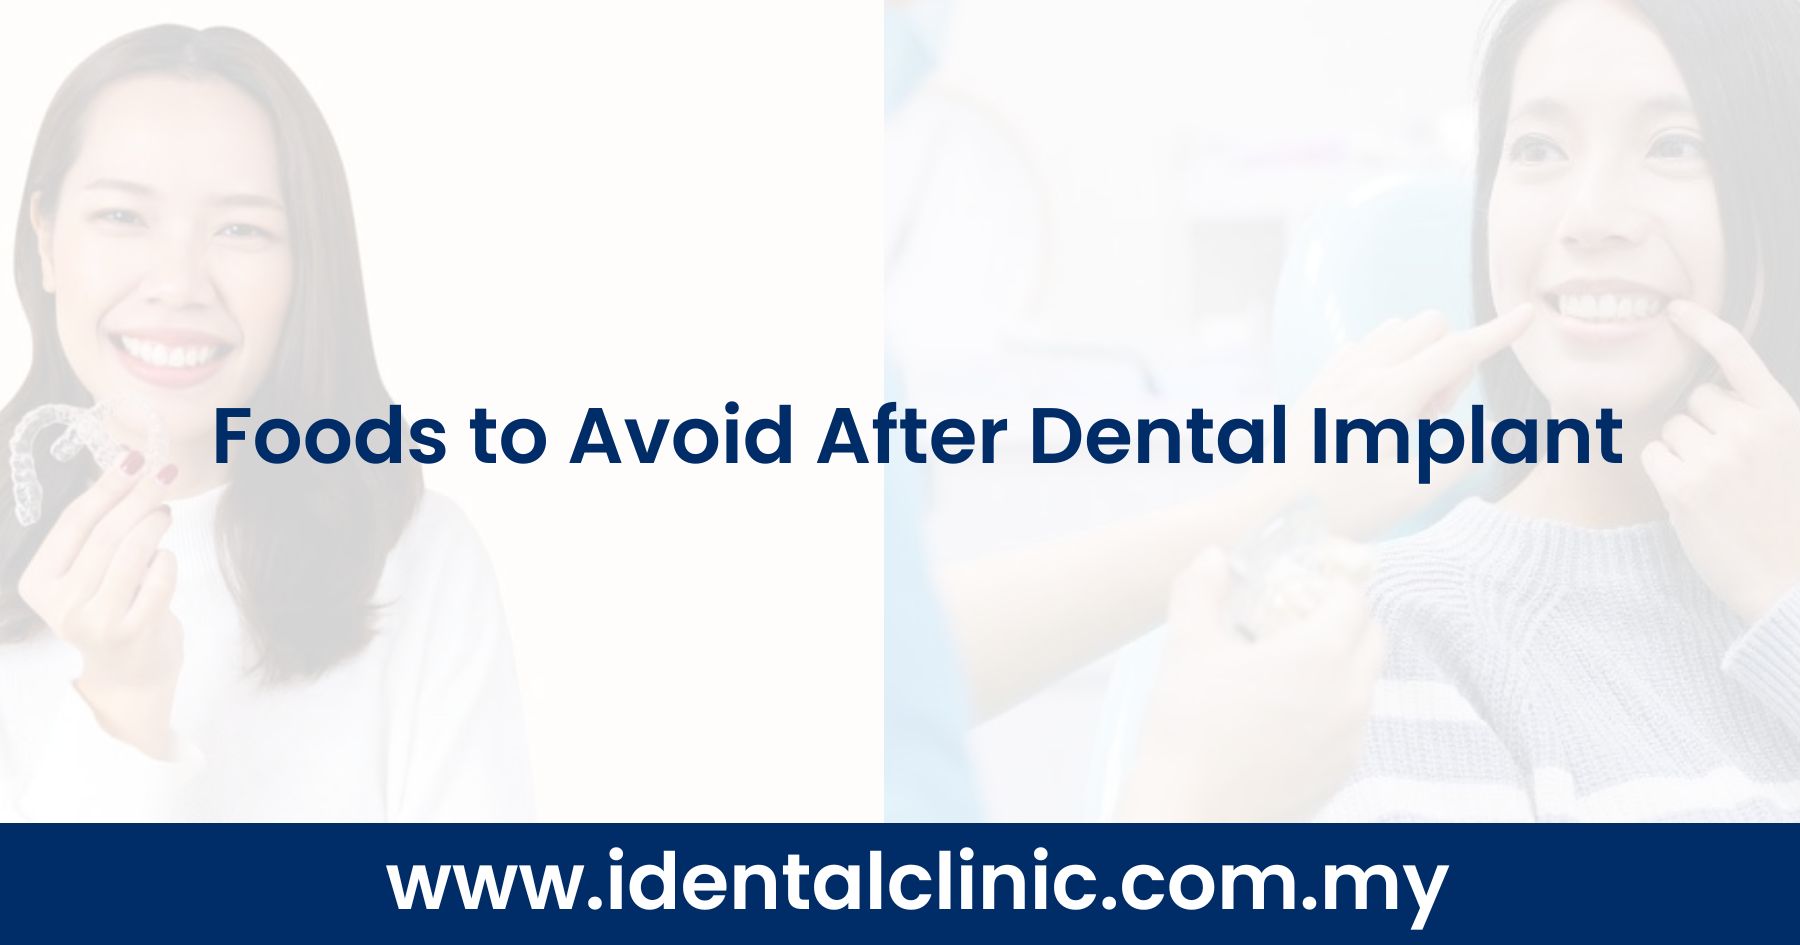 Foods to Avoid After Dental Implant